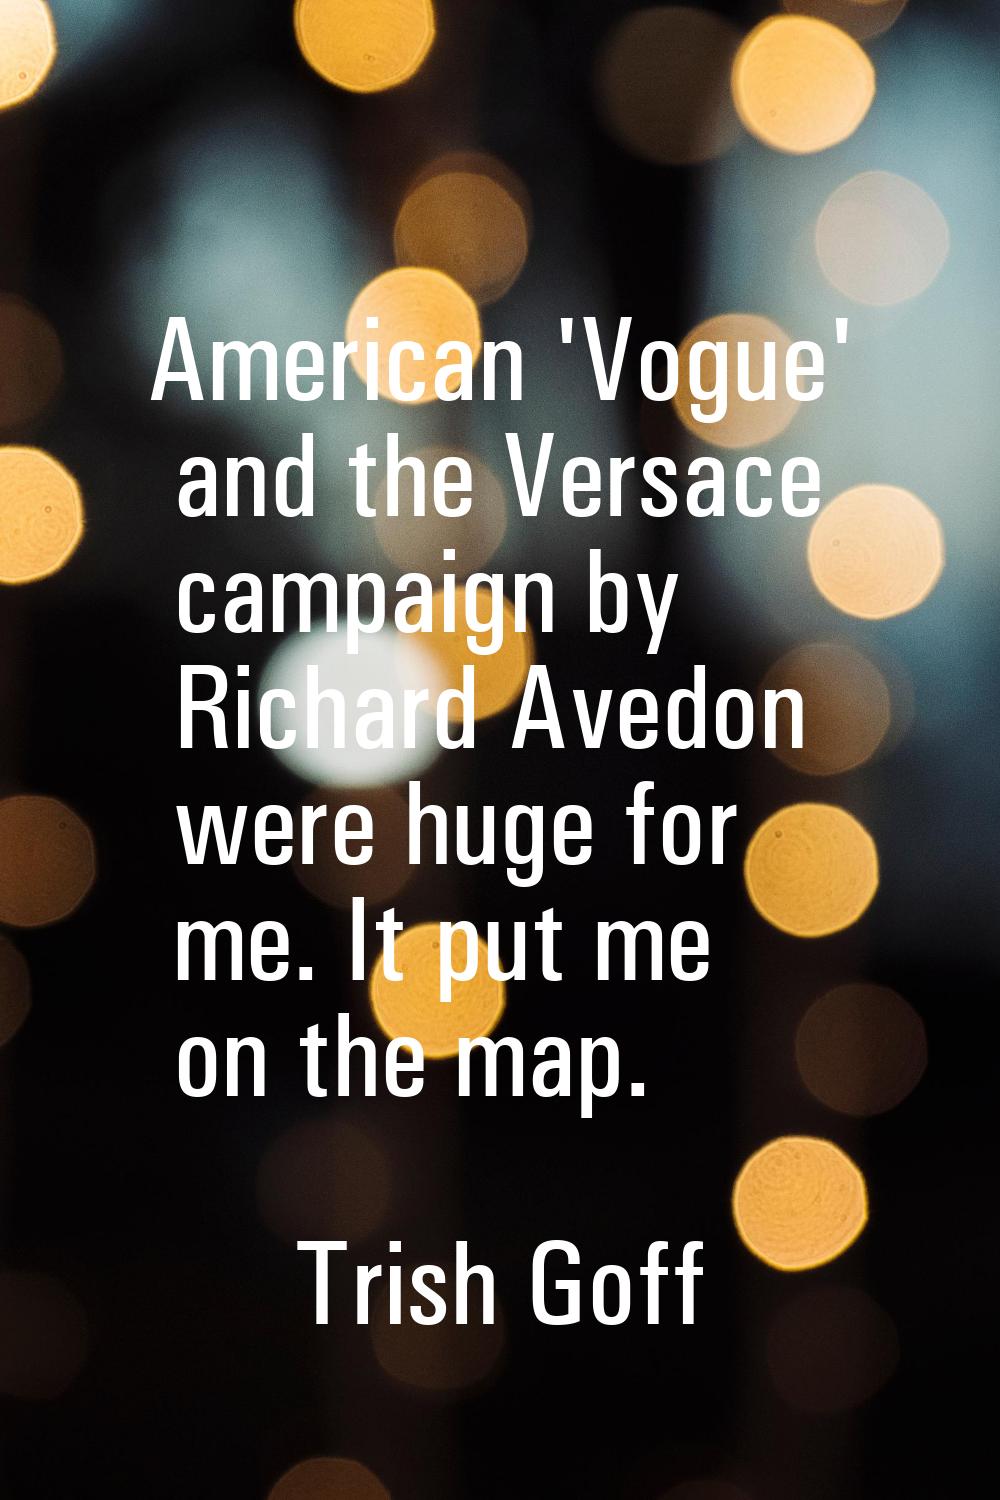 American 'Vogue' and the Versace campaign by Richard Avedon were huge for me. It put me on the map.